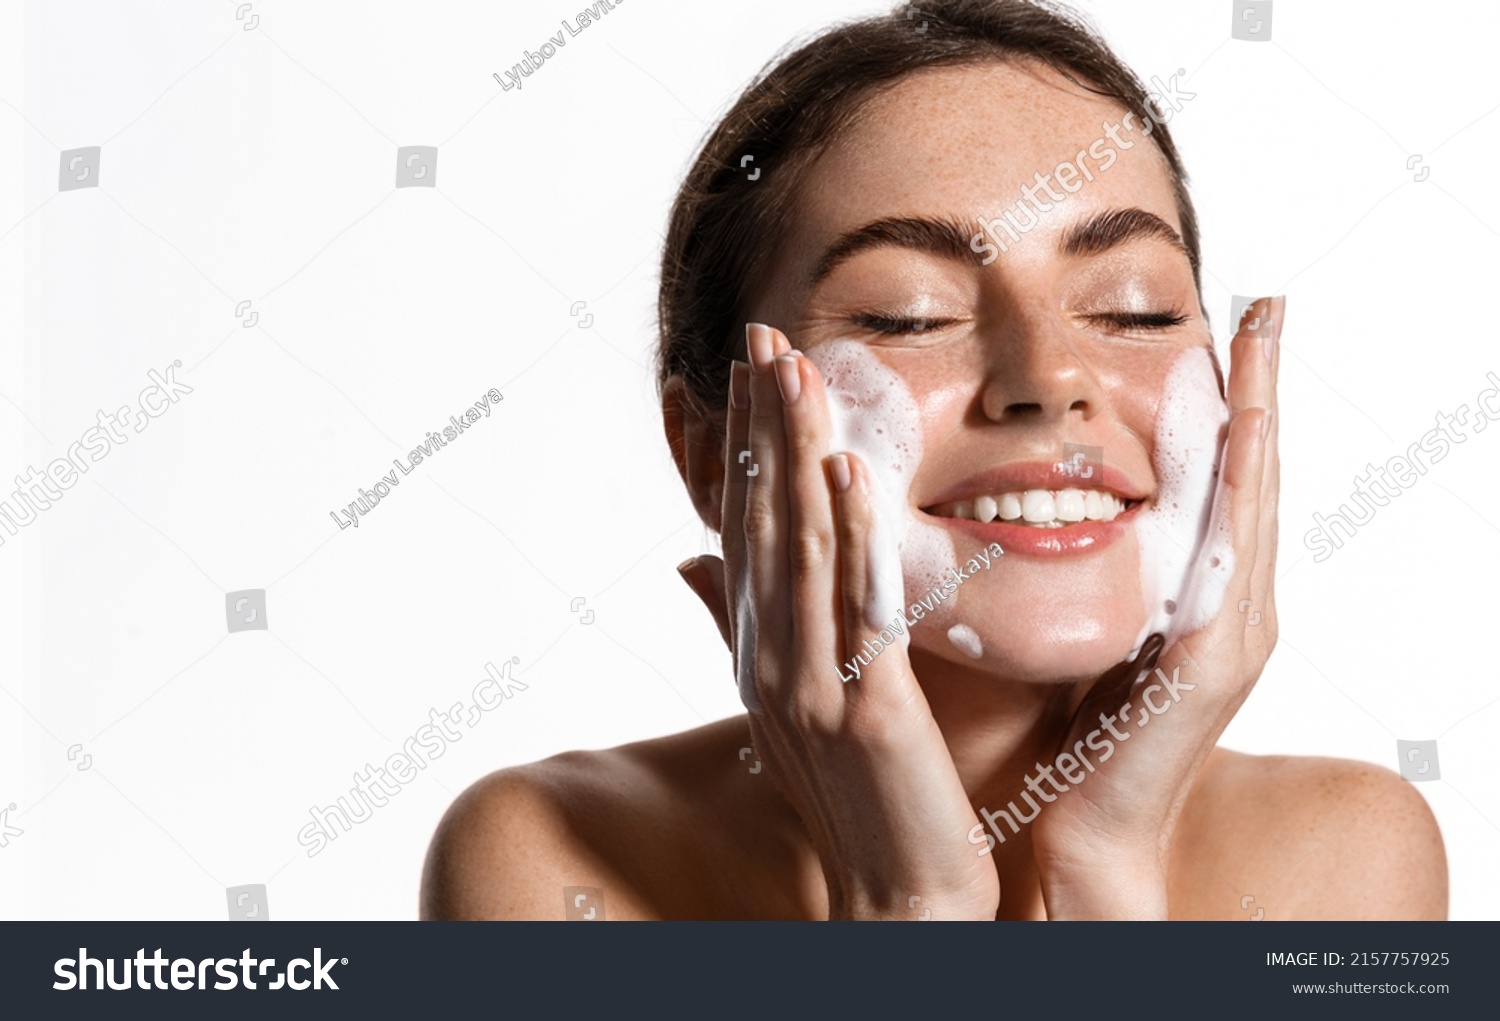 Portrait of cheerful laughing woman applying cleansing foam for washing face. Lovely brunette with attractive appearance. Skincare spa relax concept. Isolated on white background #2157757925